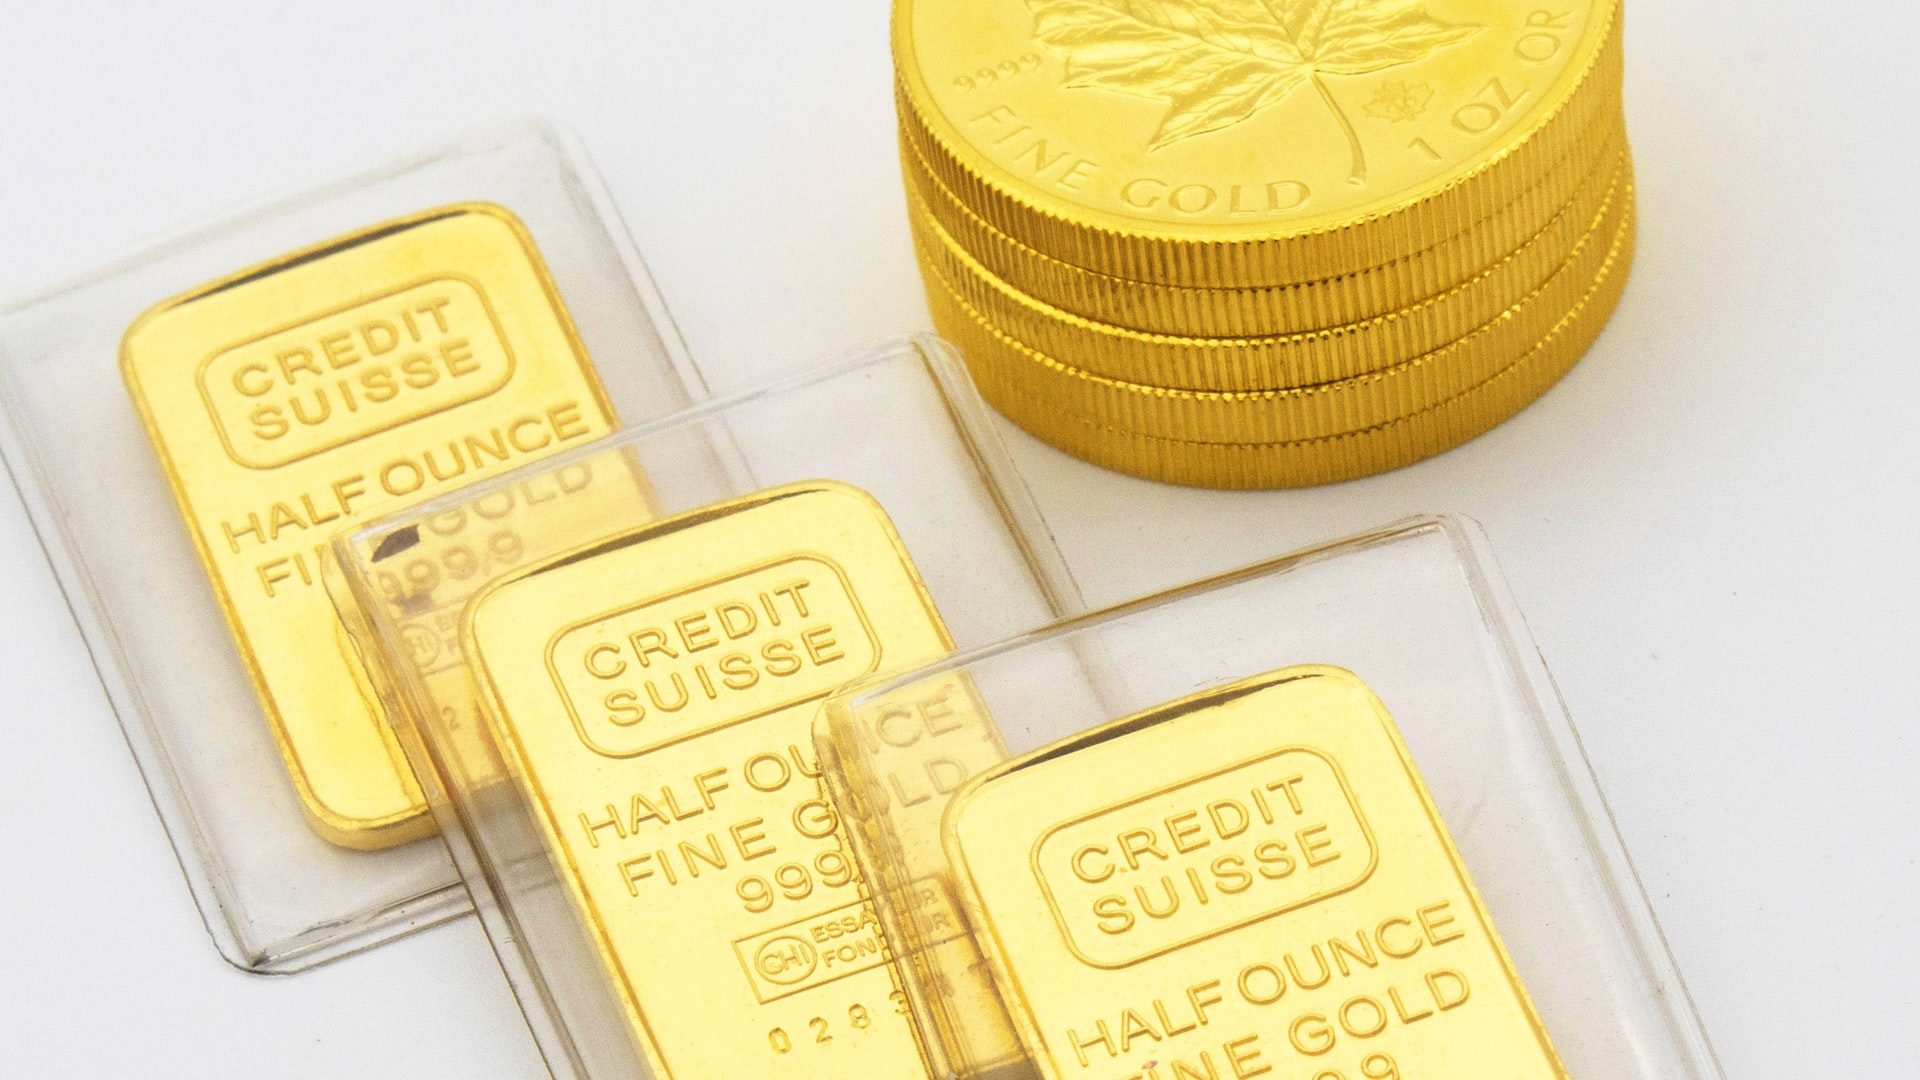 gold coins and bars and bullion